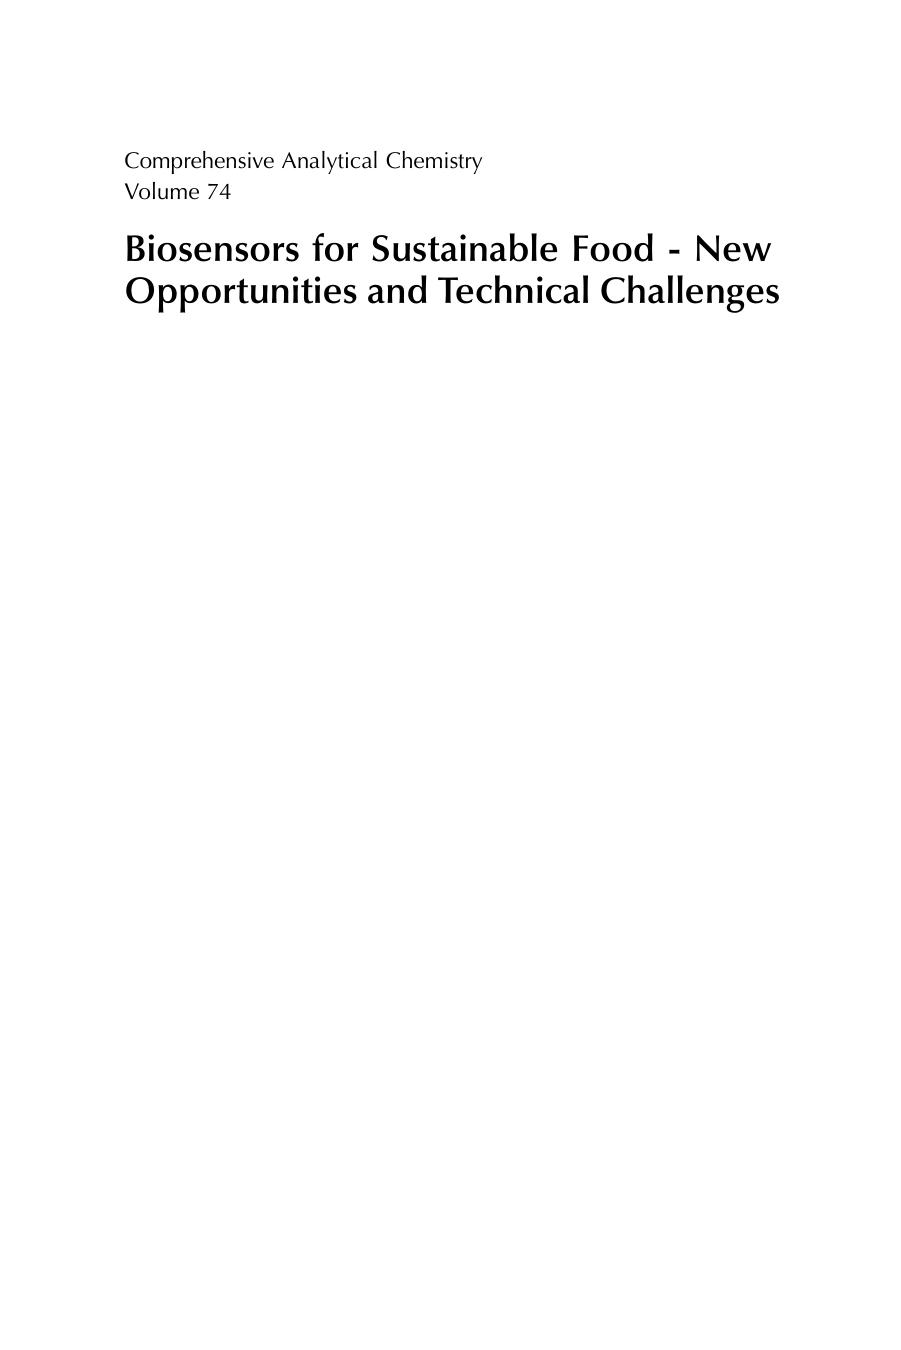 Biosensors for Sustainable Food